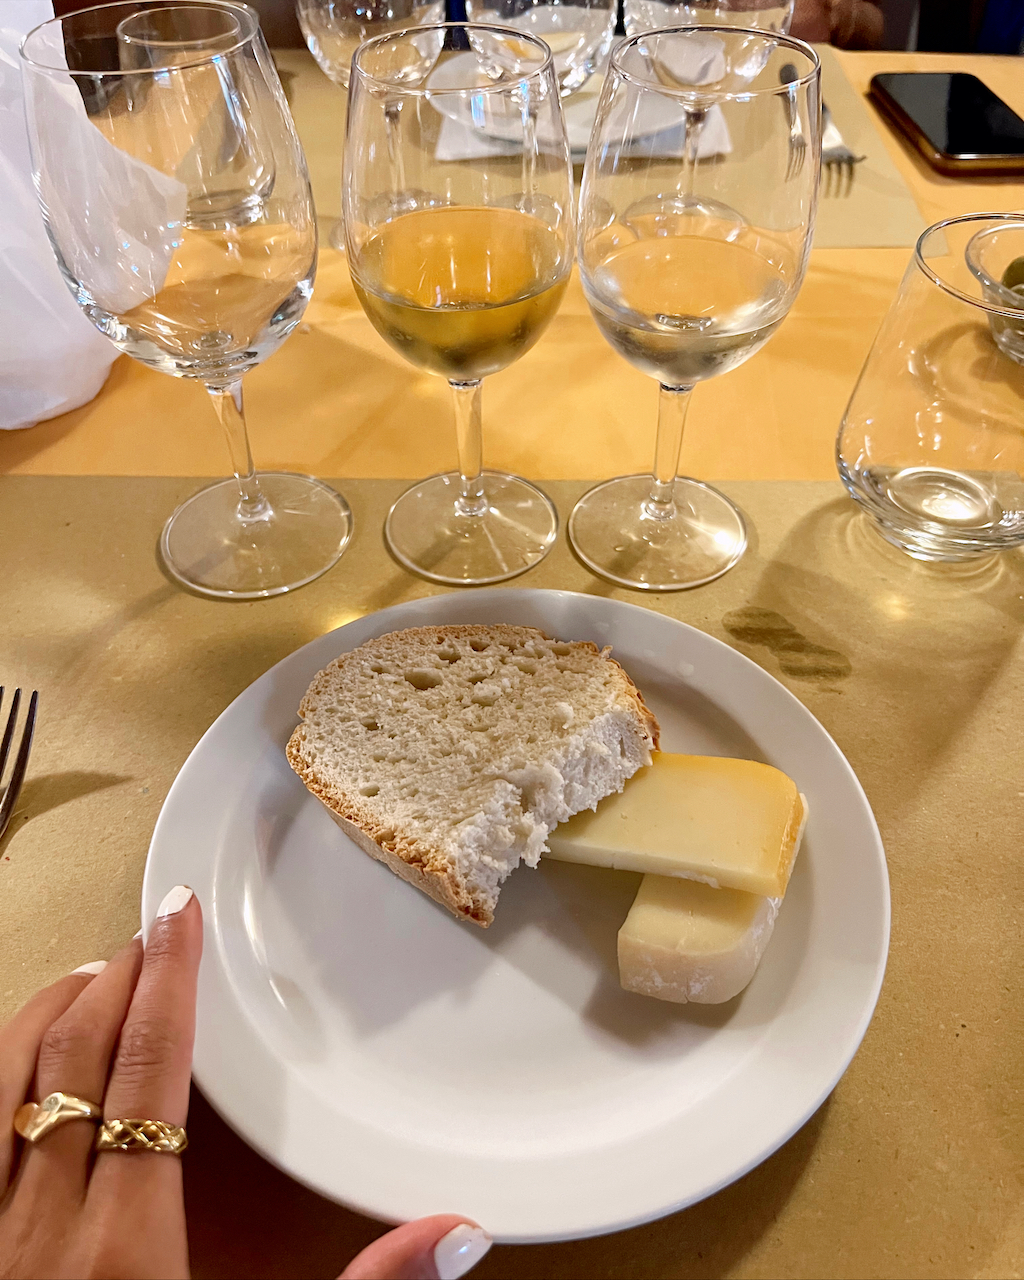 The Best Tuscan Wine Tour For Study Abroad Students